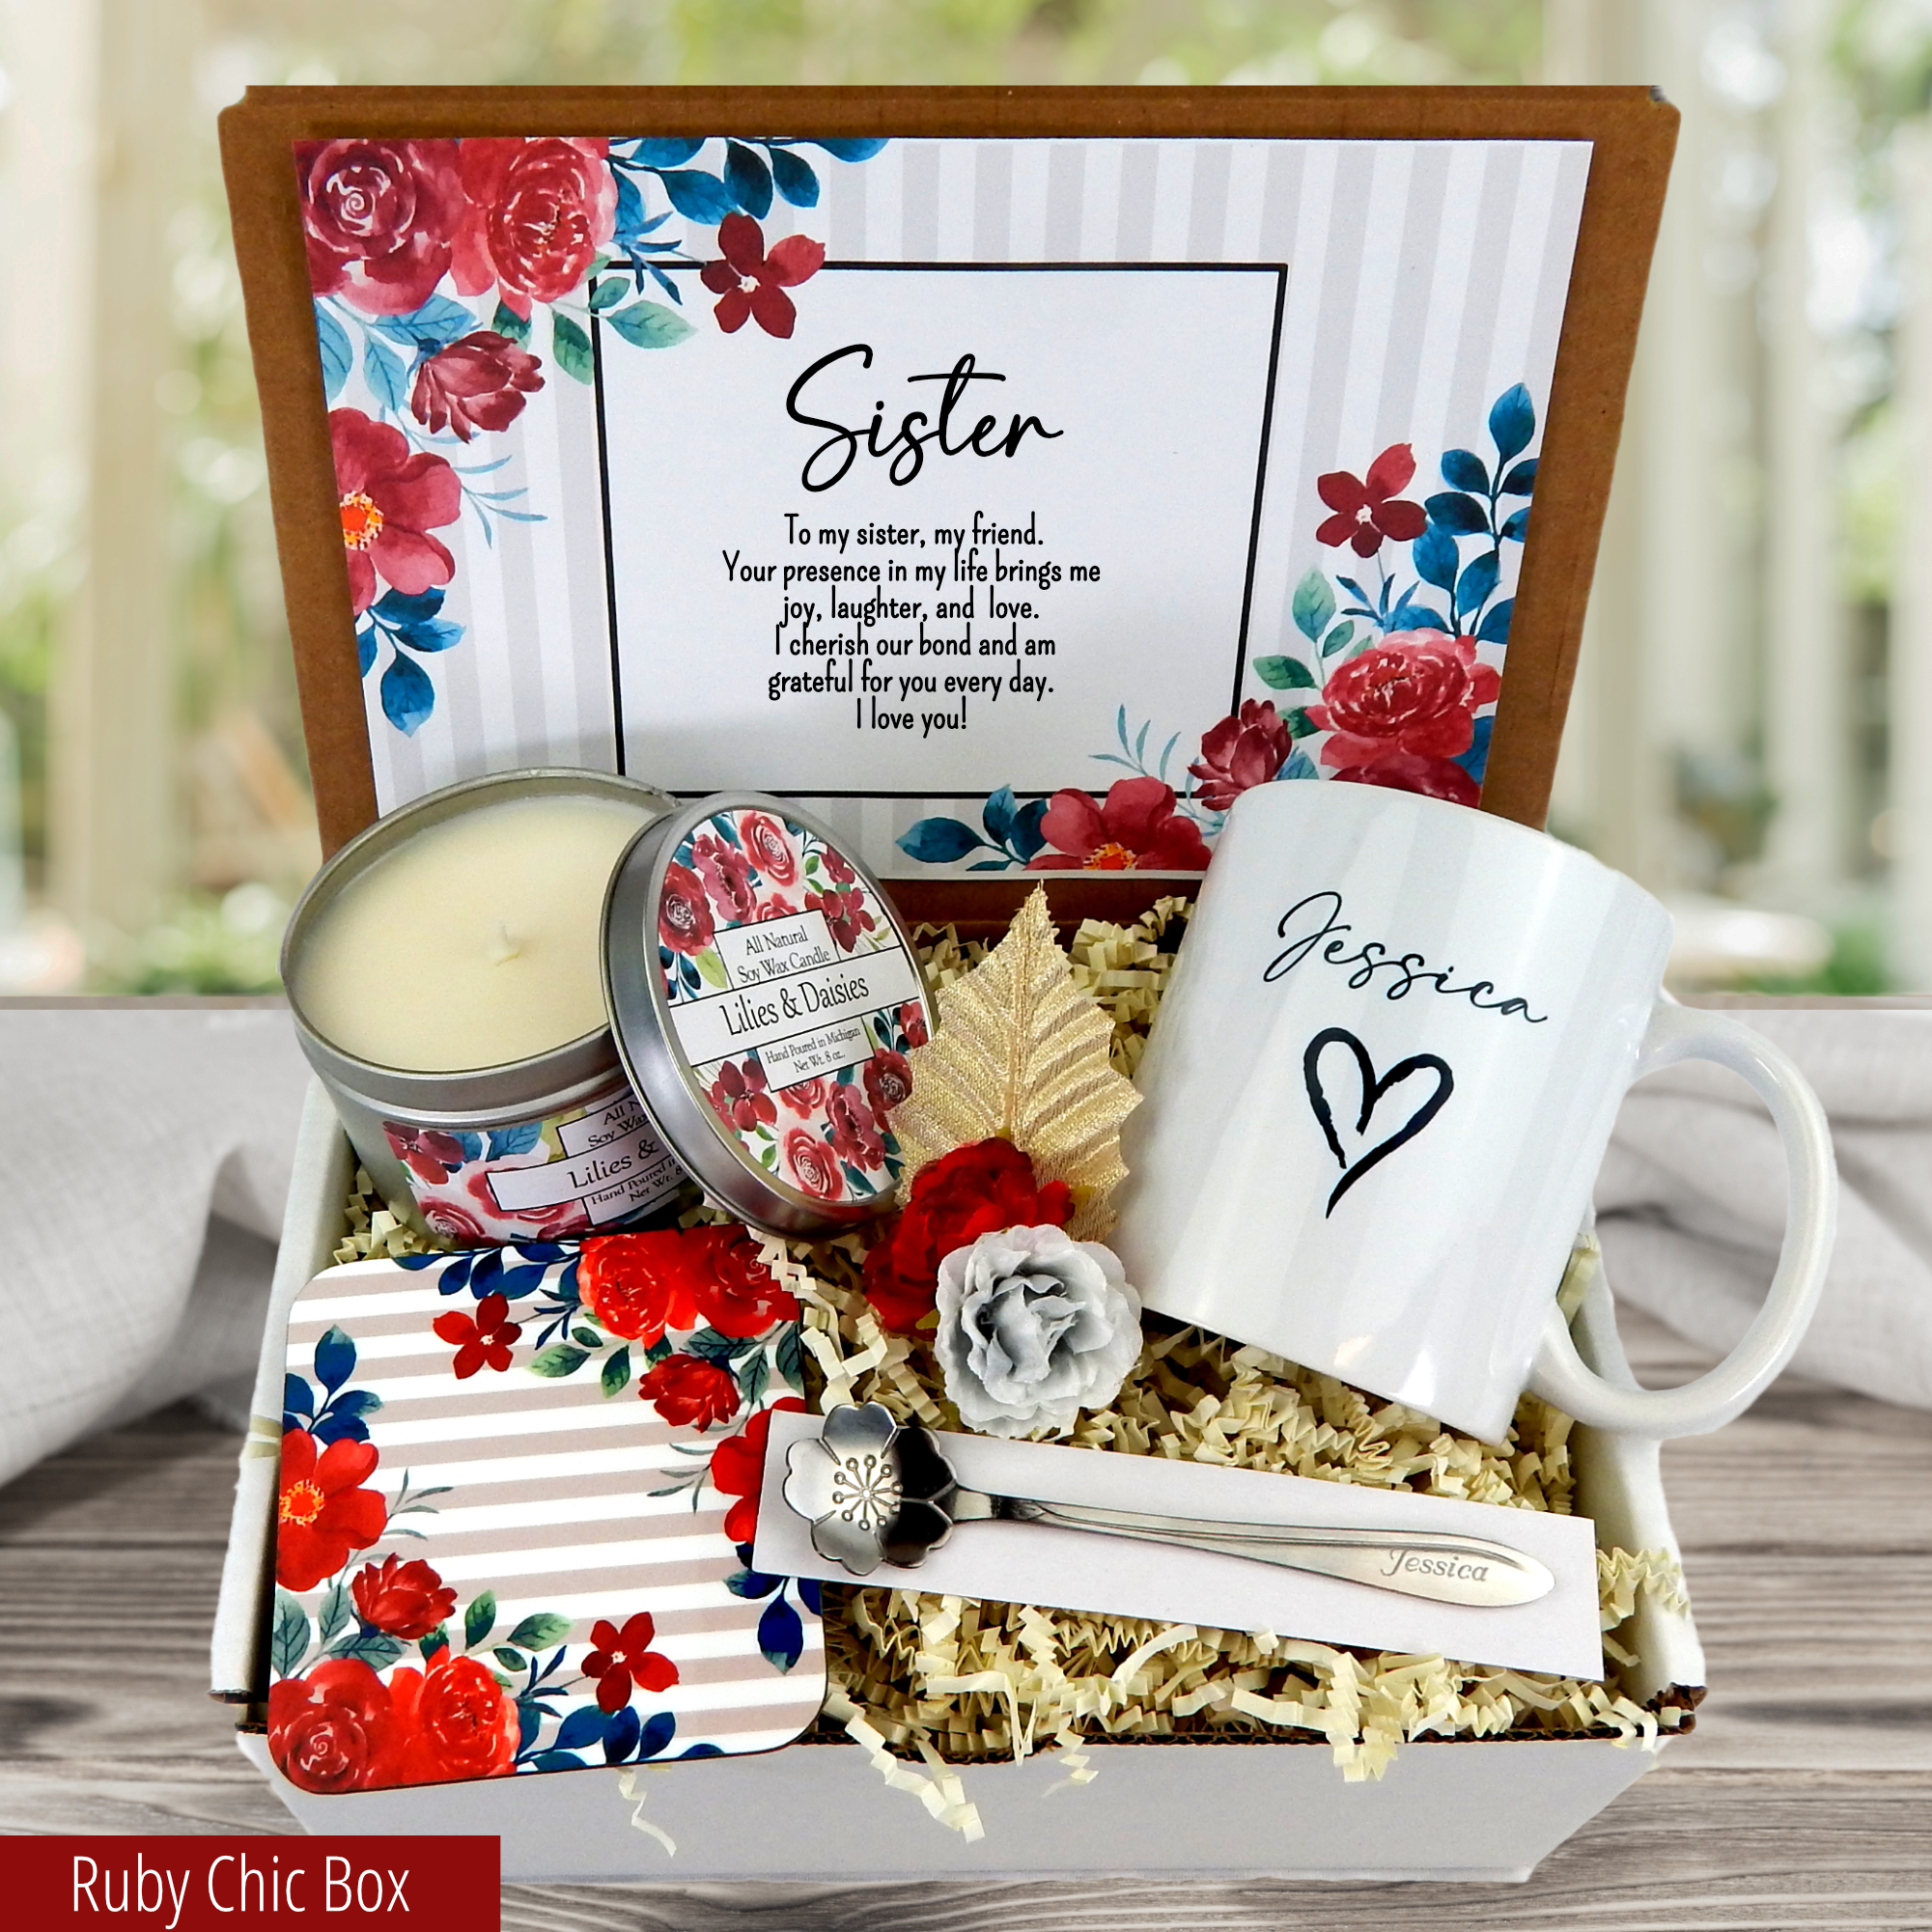 30 Amazing Gift Boxes for Your Sister's Birthday – Shadow Breeze